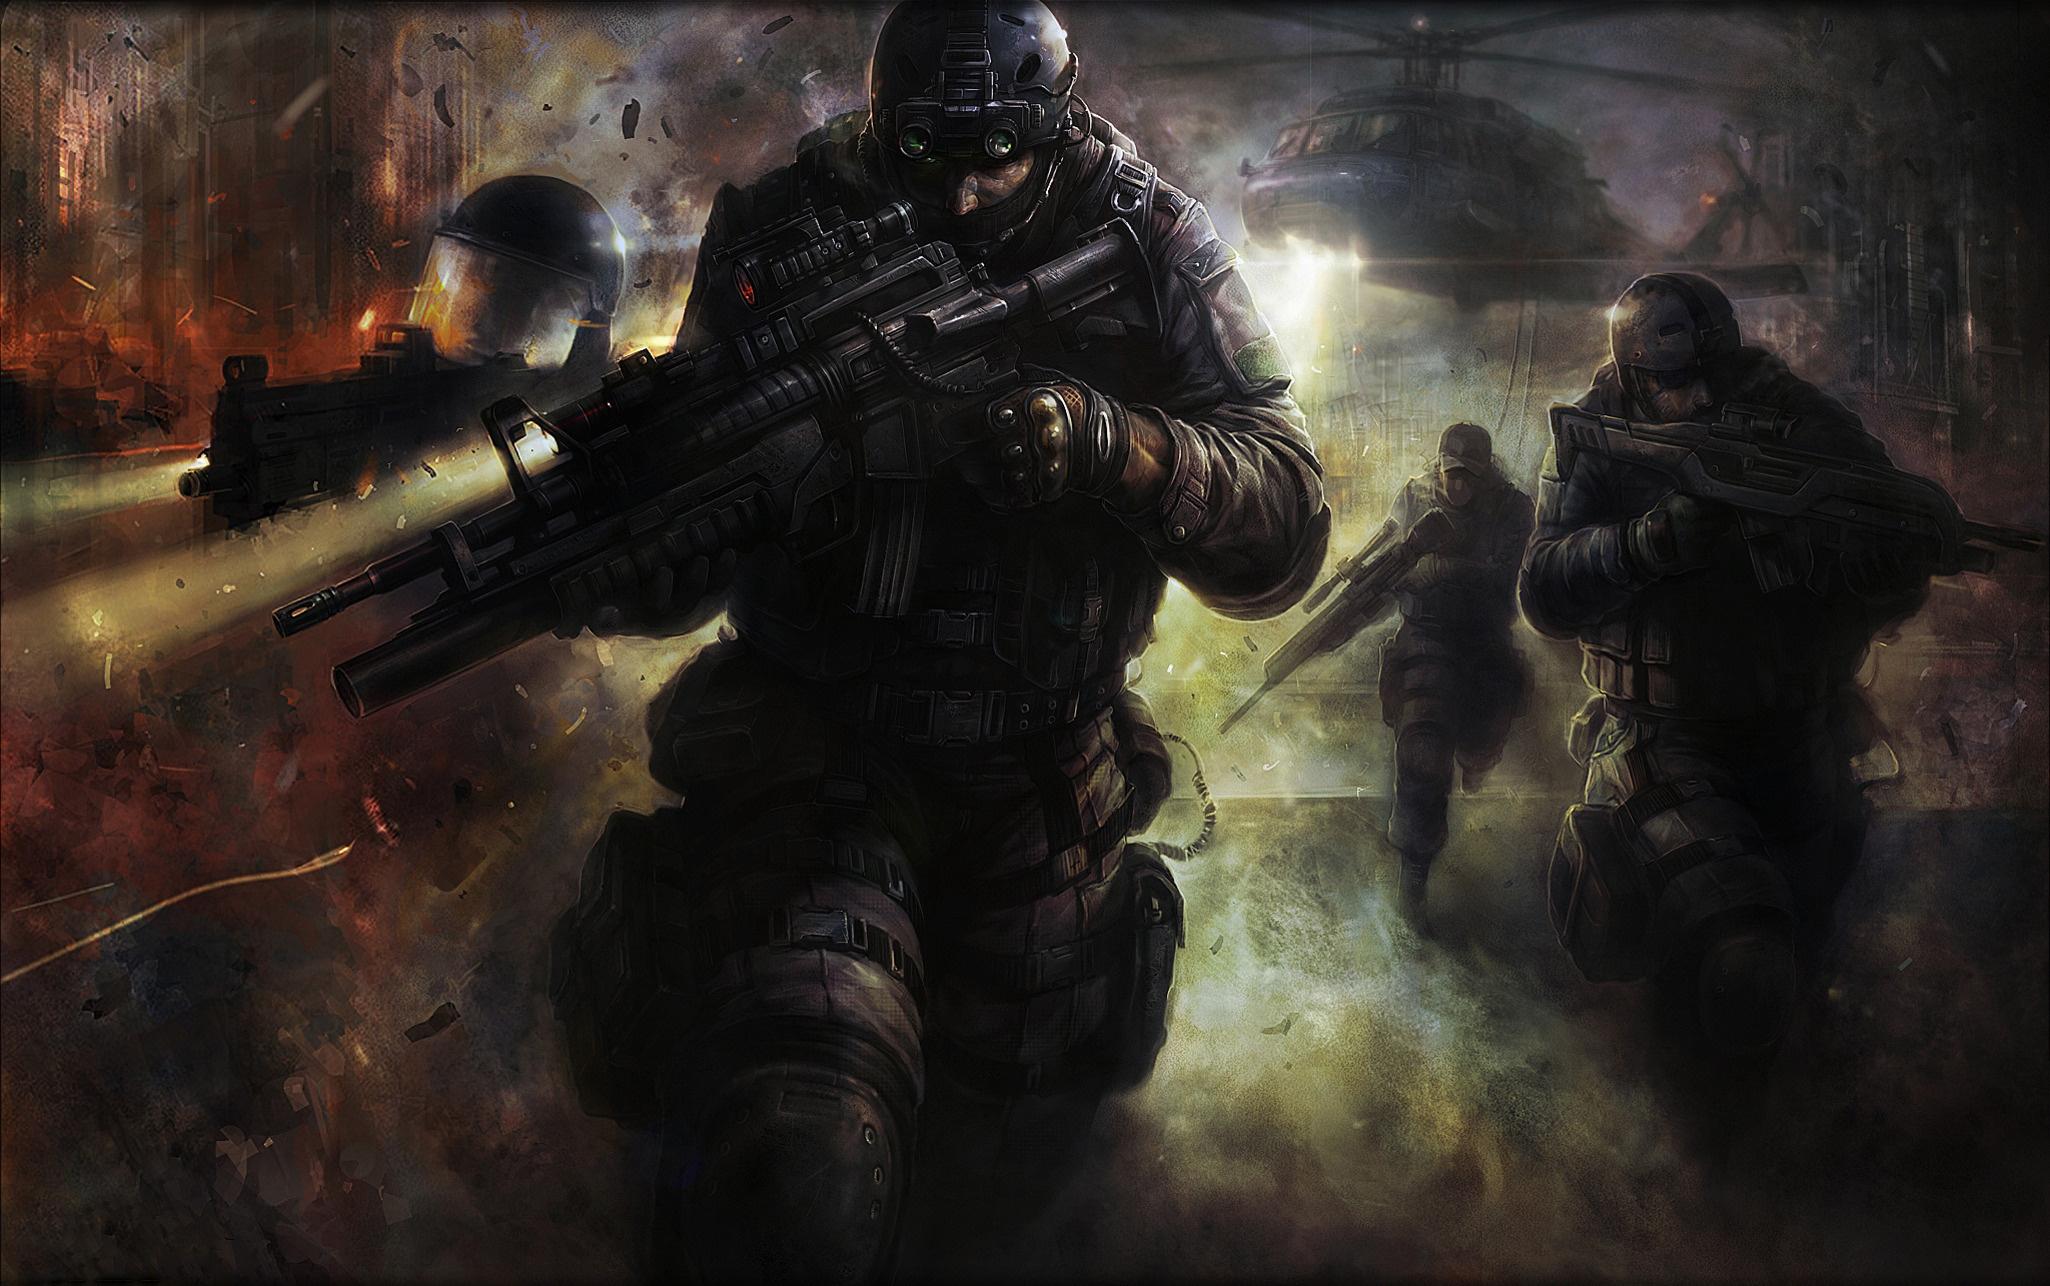 Wallpaper BlackShot, soldier, Special Forces, weapon, helicopter